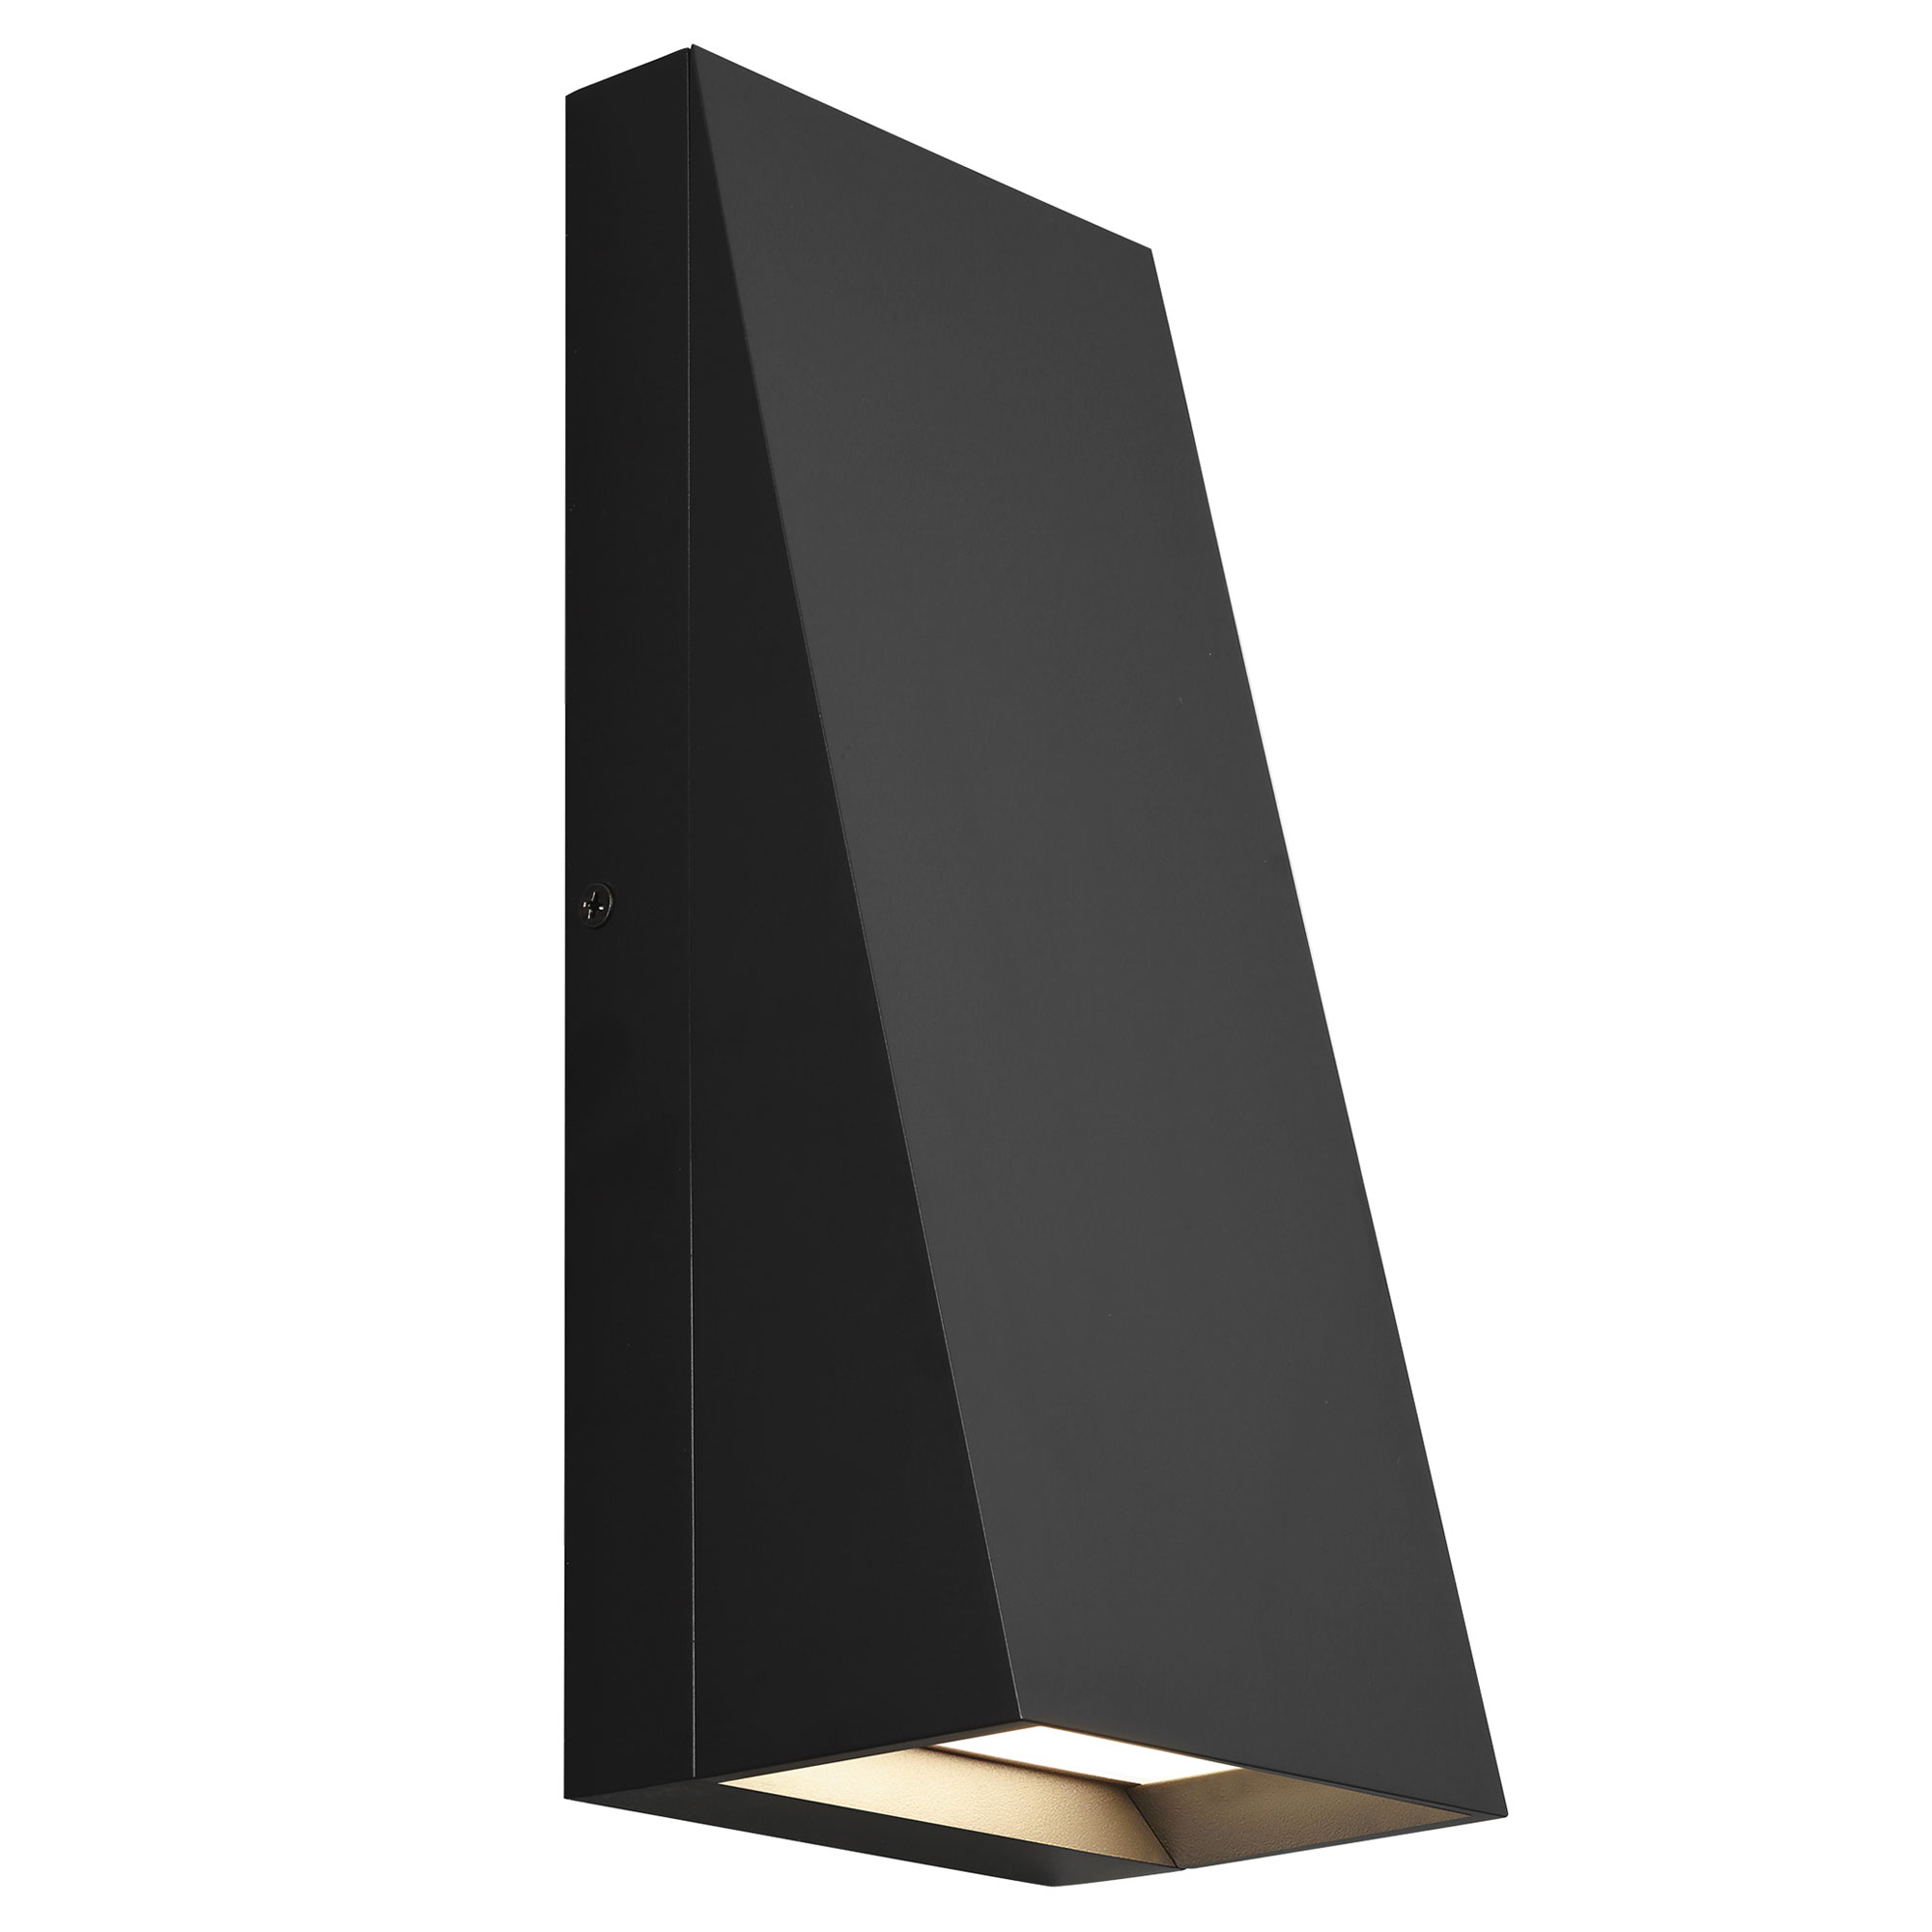 Campo Estrecho de Bering rojo Pitch Outdoor Wall Sconce by Visual Comfort Modern | 700OWPIT12B-LED930 |  TLG1041509